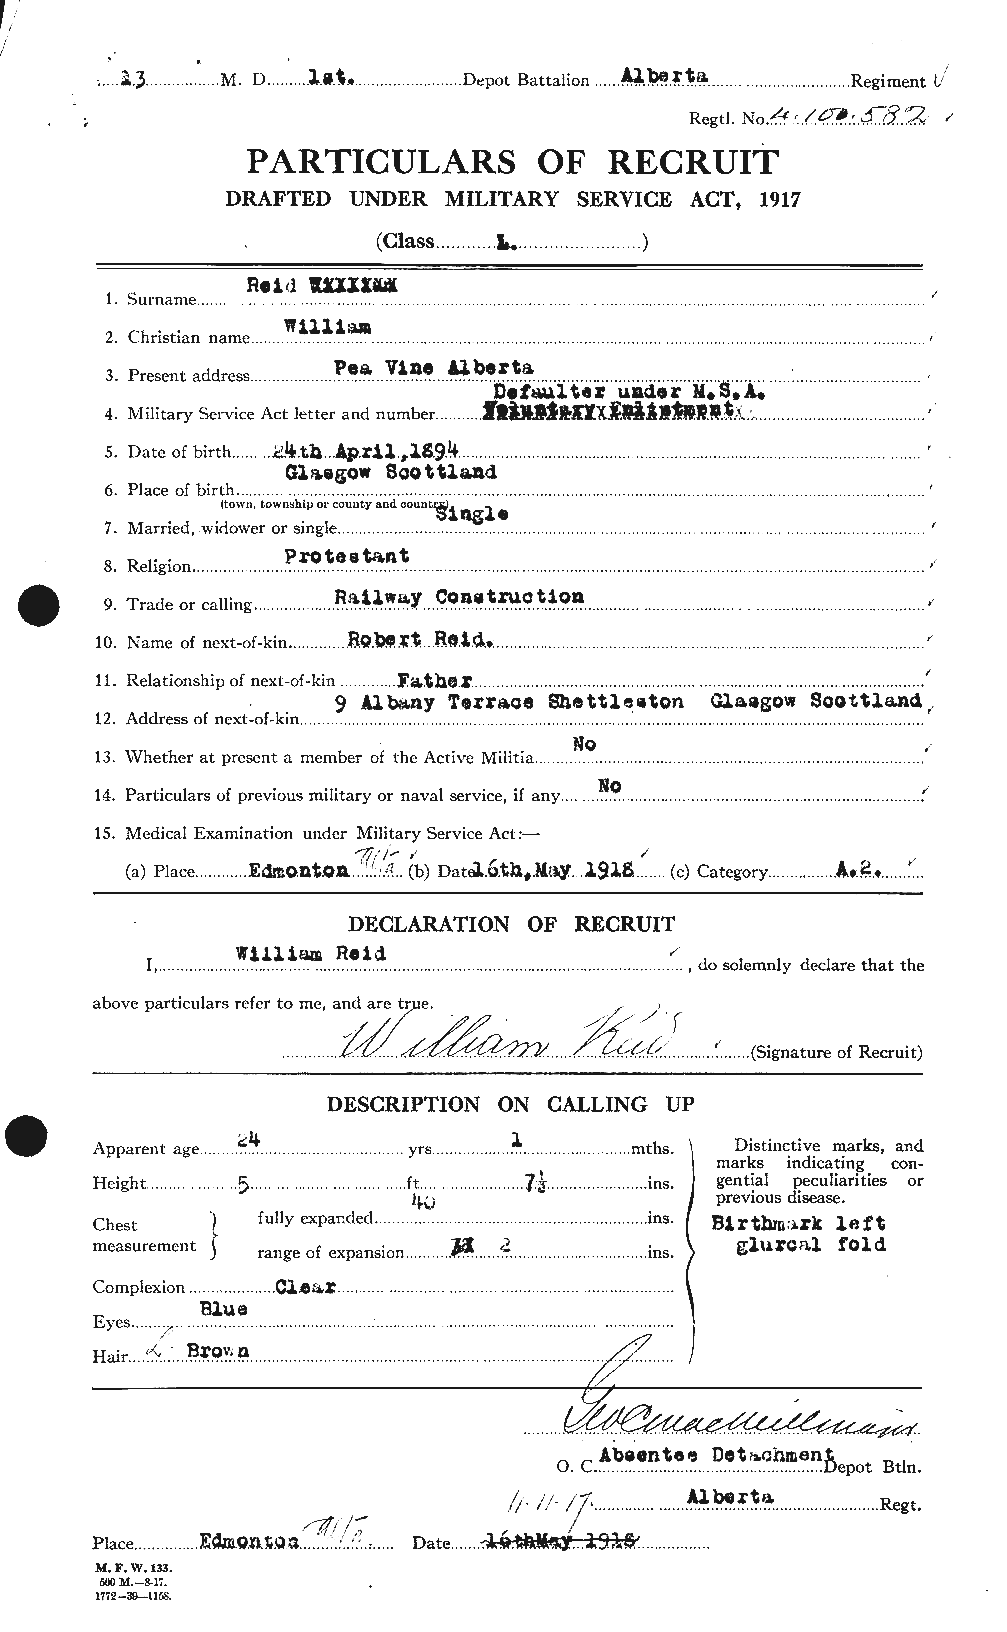 Personnel Records of the First World War - CEF 596942a